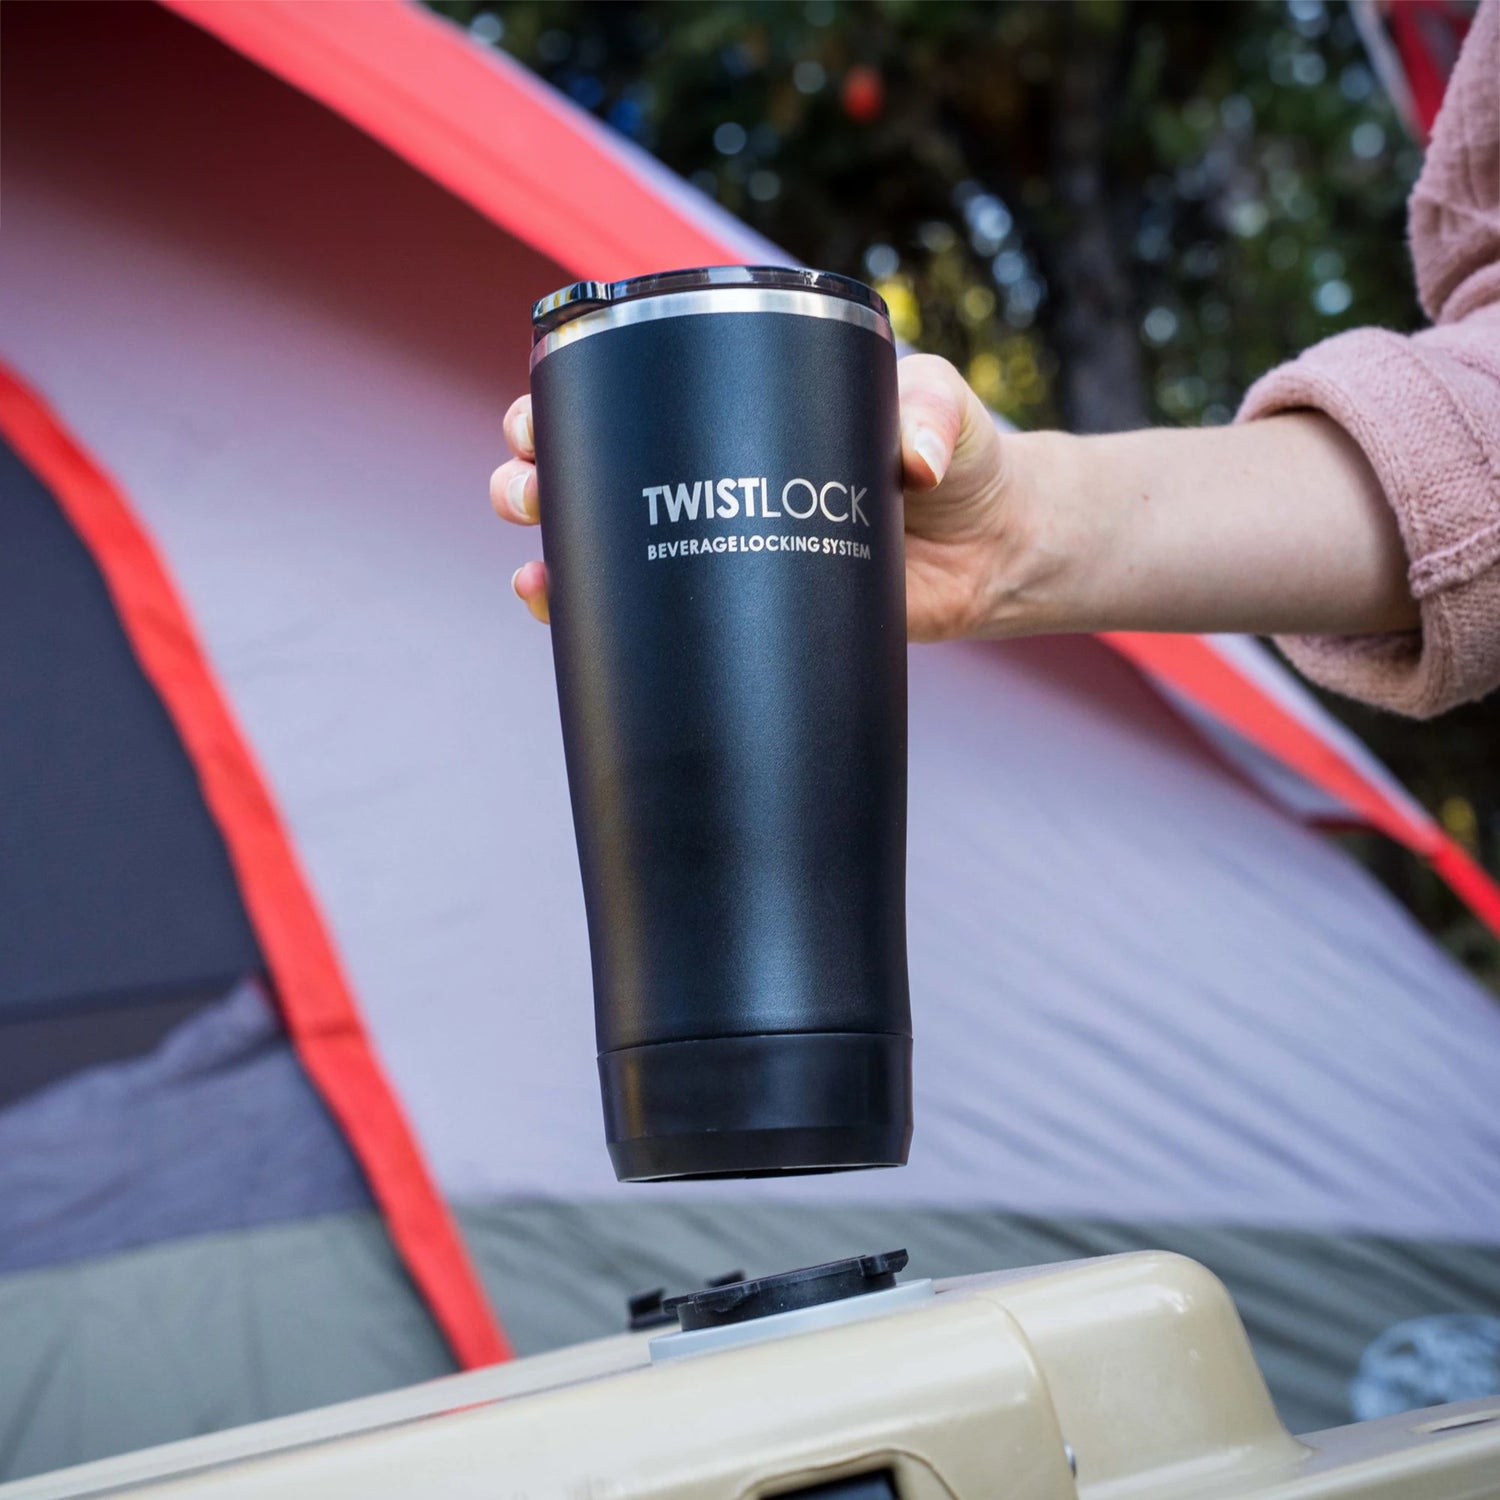 Tumble locking into an attachable mini disc cup holder on camping cooler.